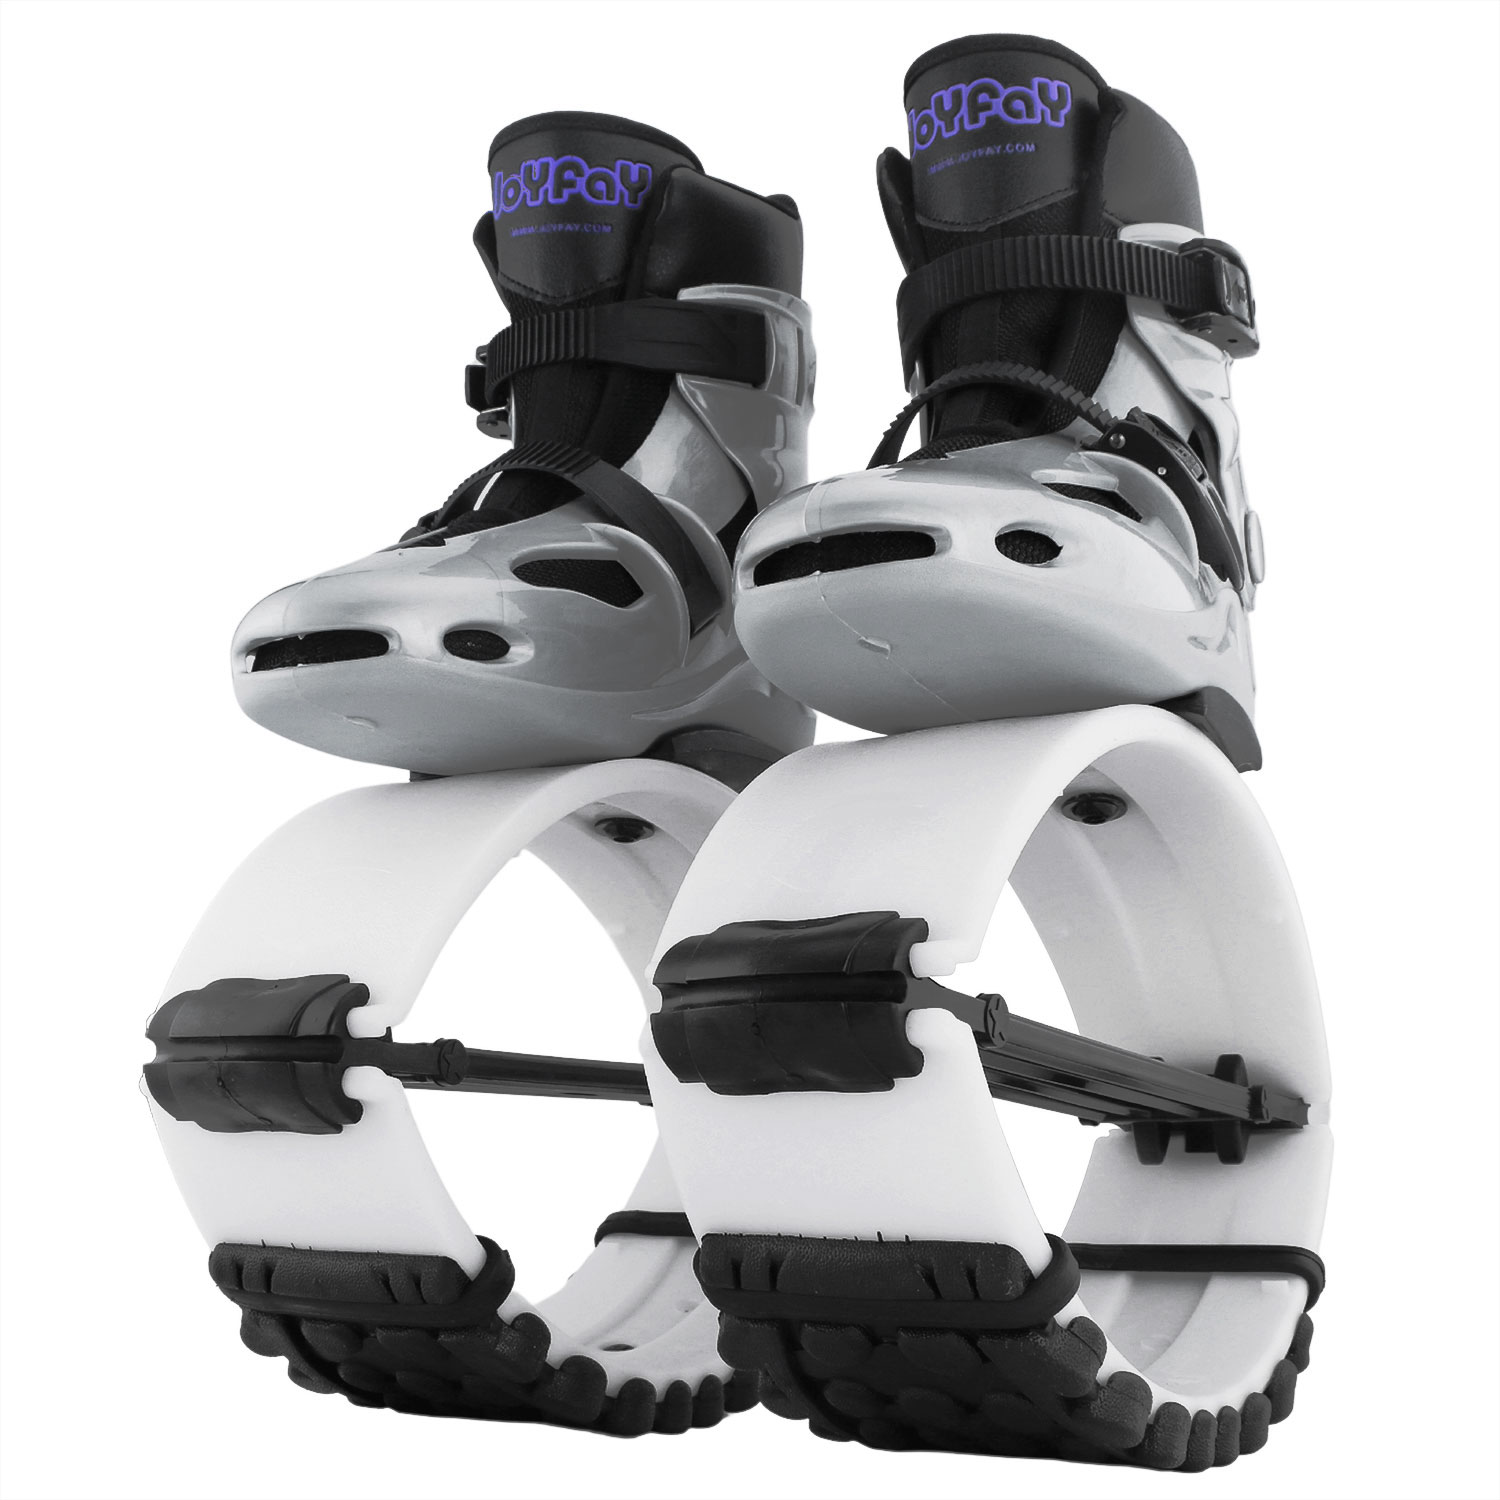 Kangoo Jumps Other Fitness Equipment & Gear for sale